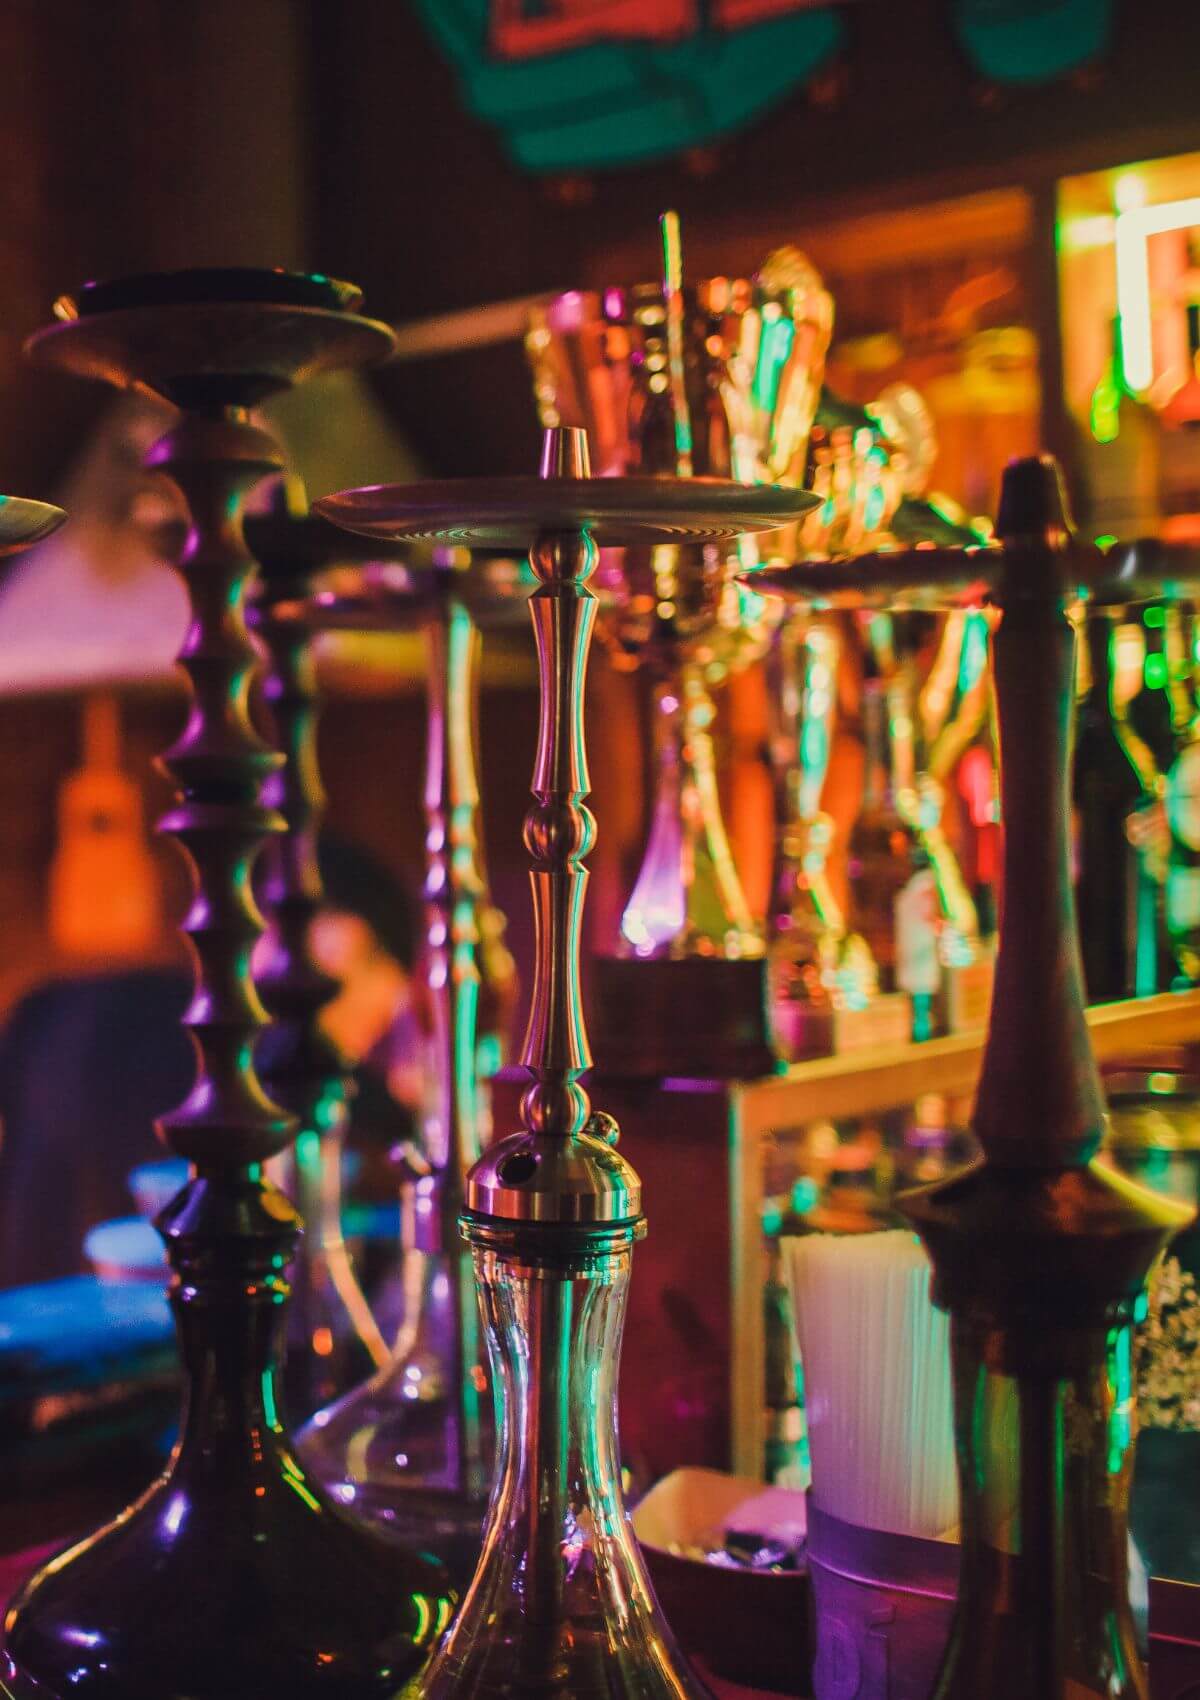 Hookahs are traditional Egyptian souvenirs